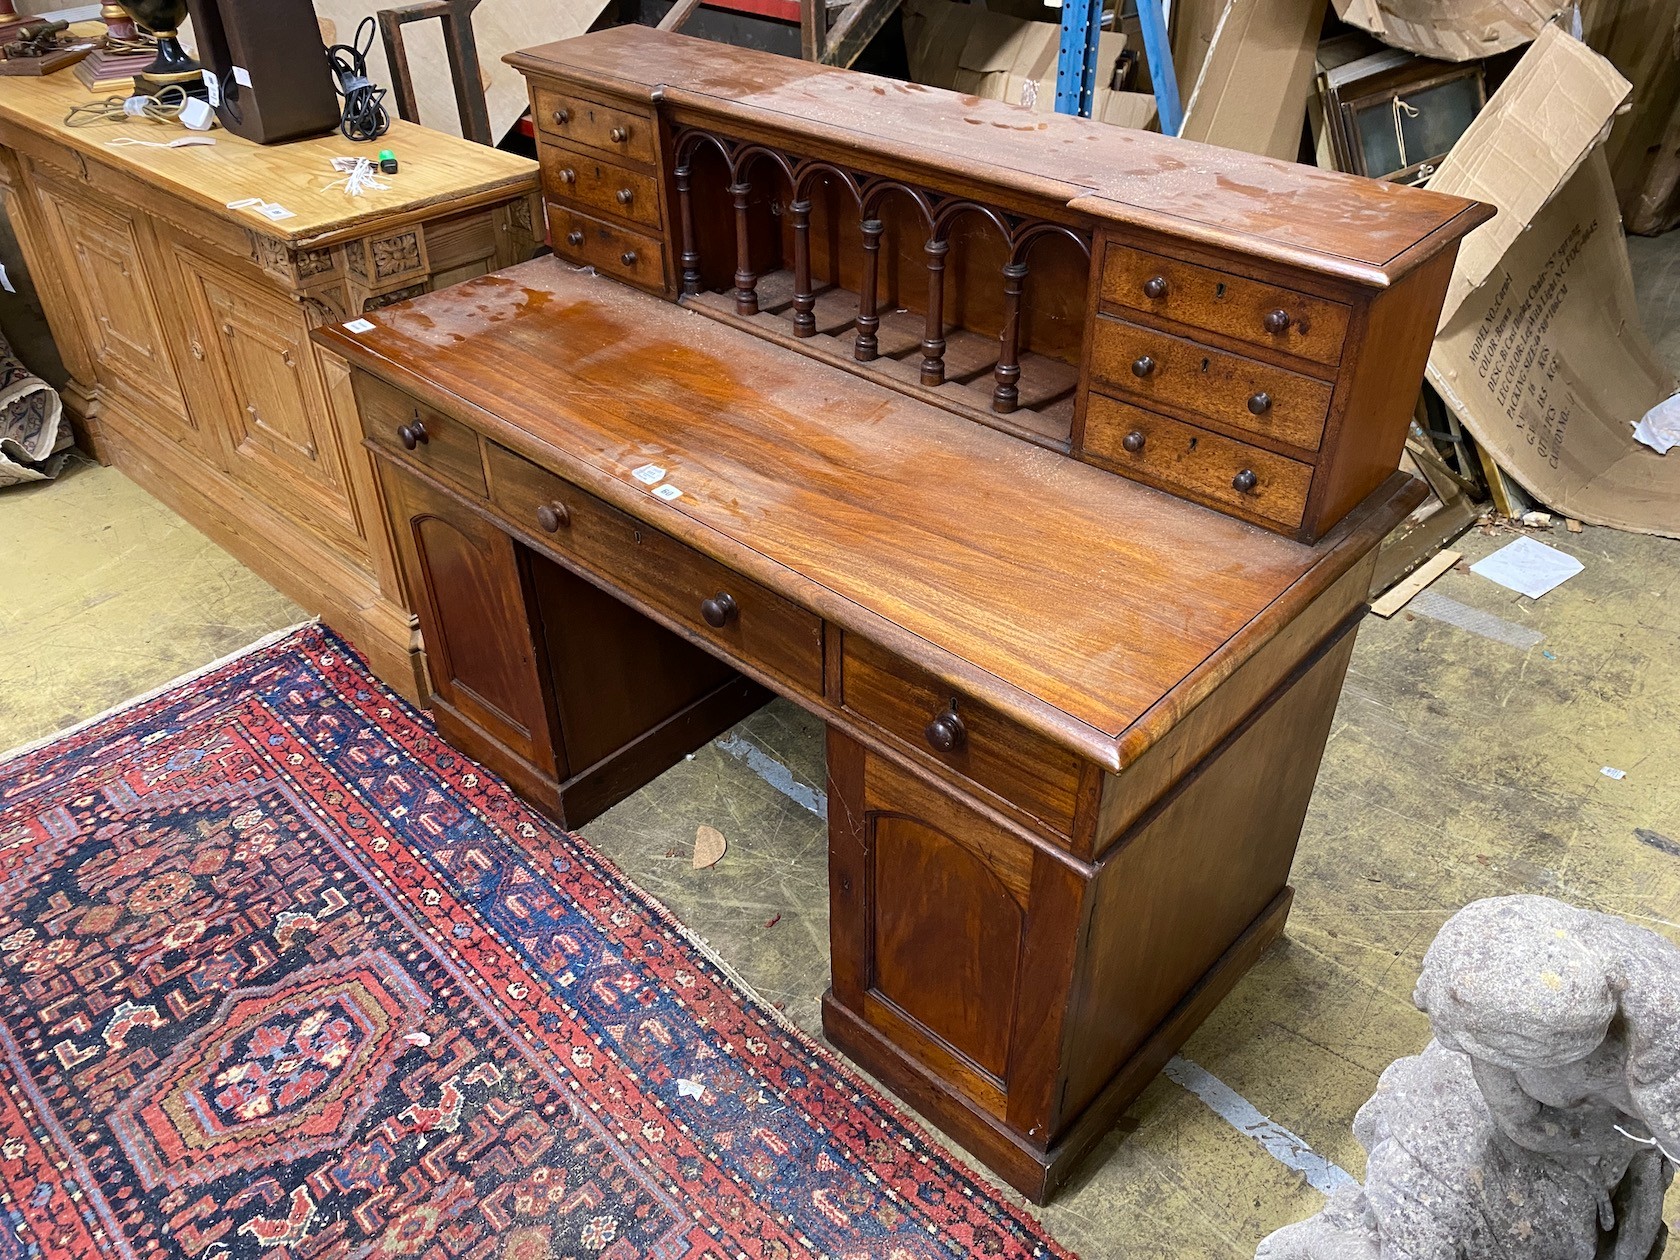 A Victorian style hardwood kneehole desk with galleried superstructure, length 140cm, depth 64cm, height 112cm